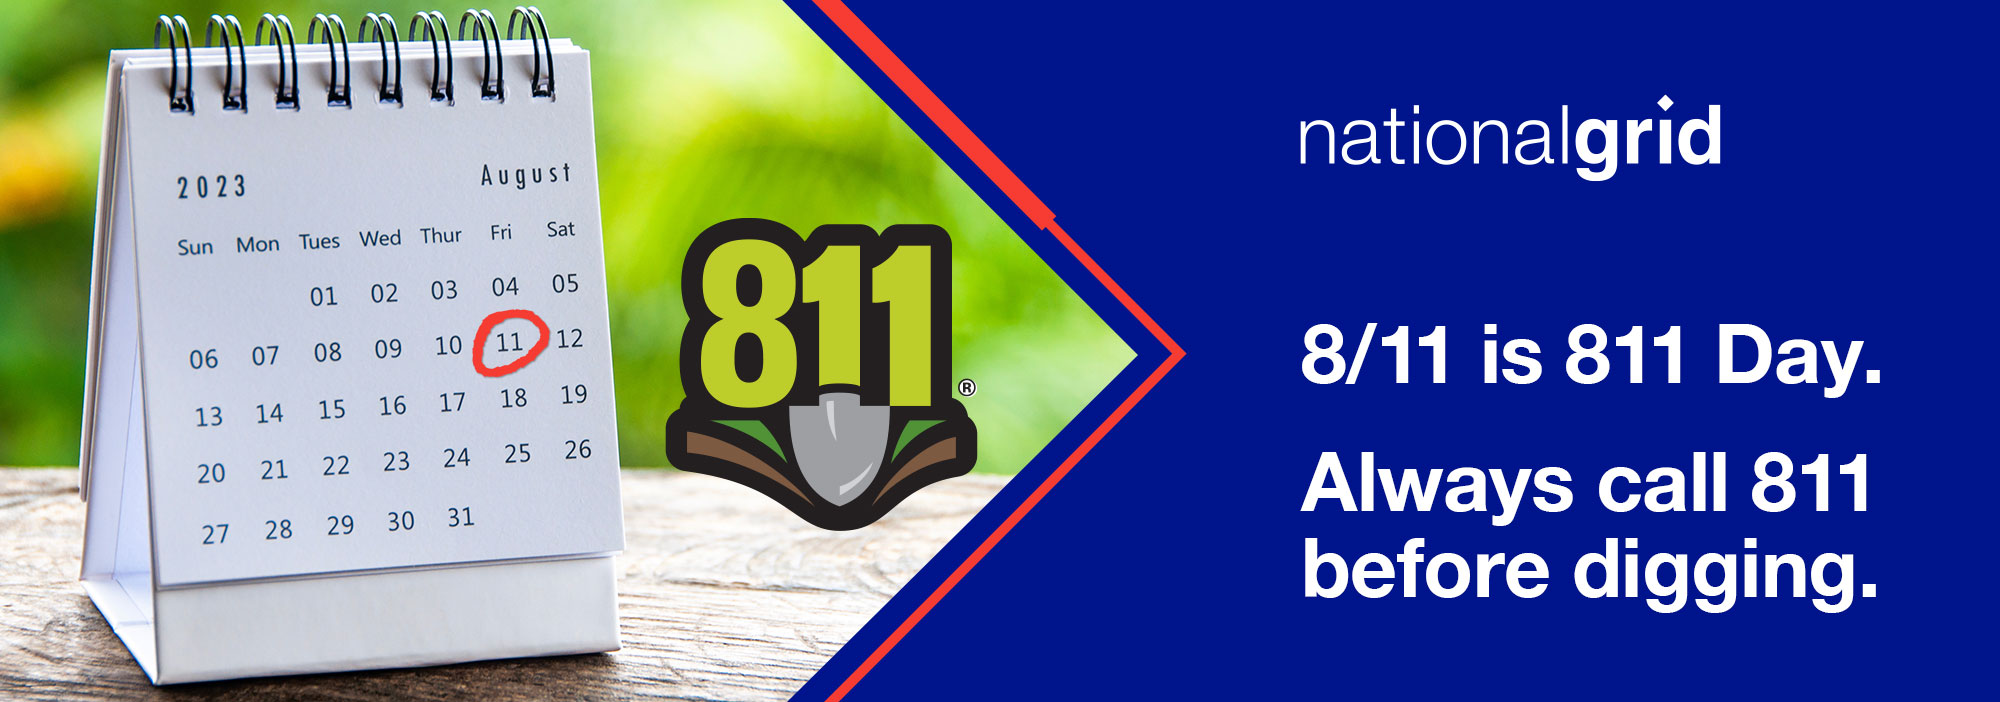 National Grid | 8/11 is 811 Day. Always call 811 before digging.